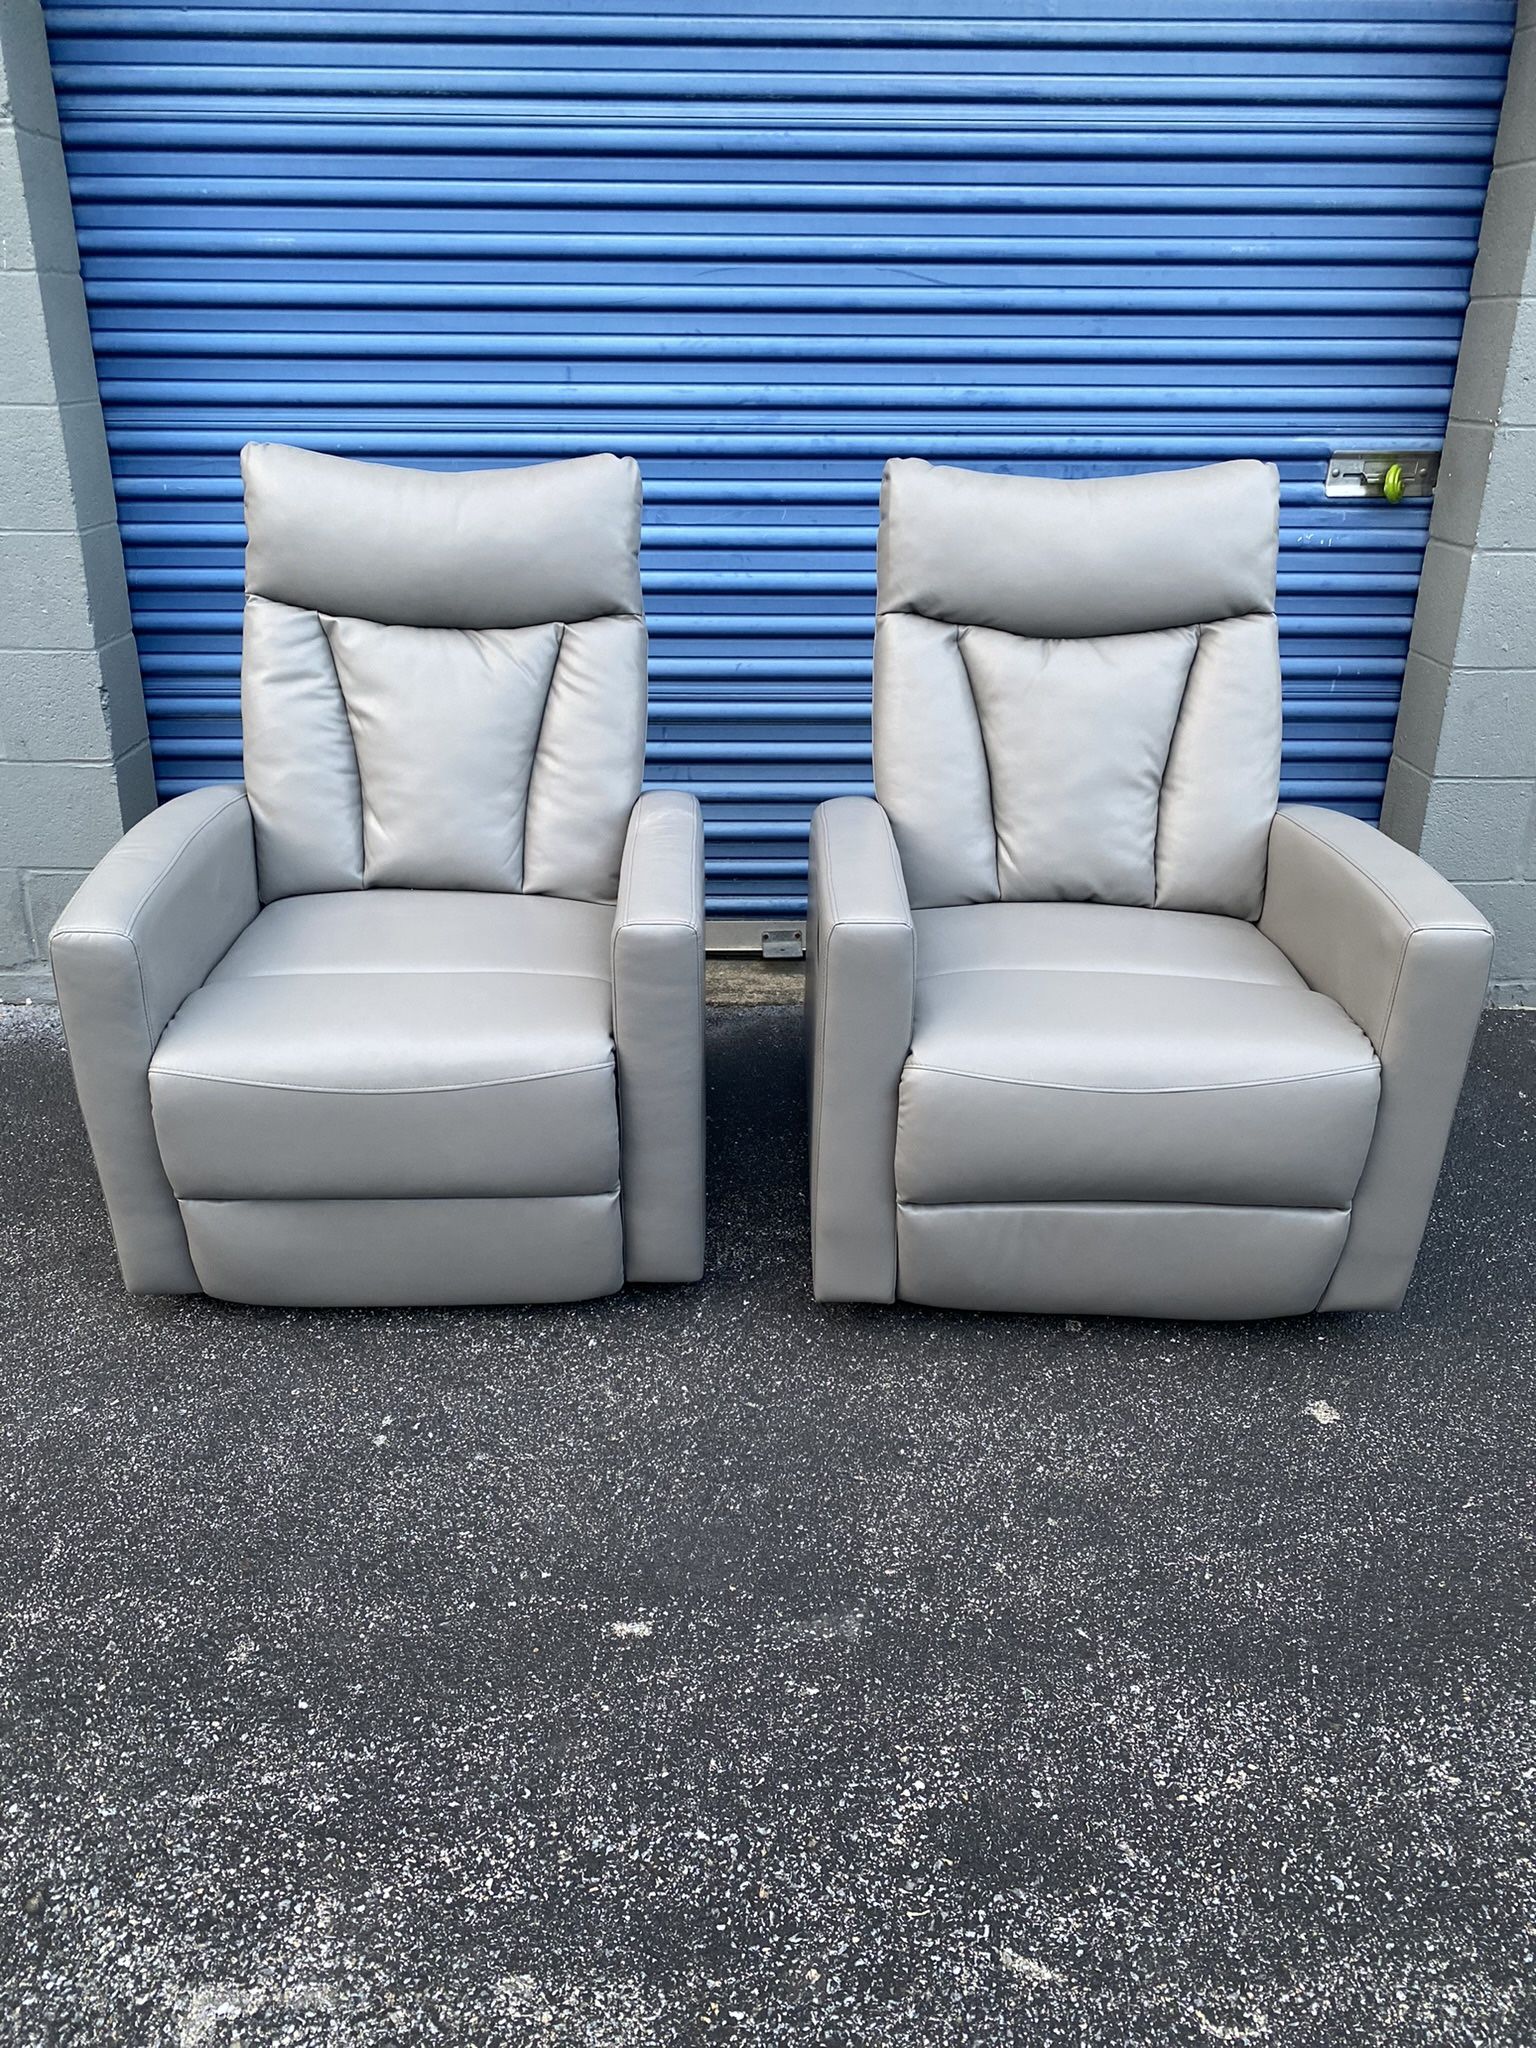 New Pair Of Grey Faux Leather Rocker Recliners Reclining Chairs 